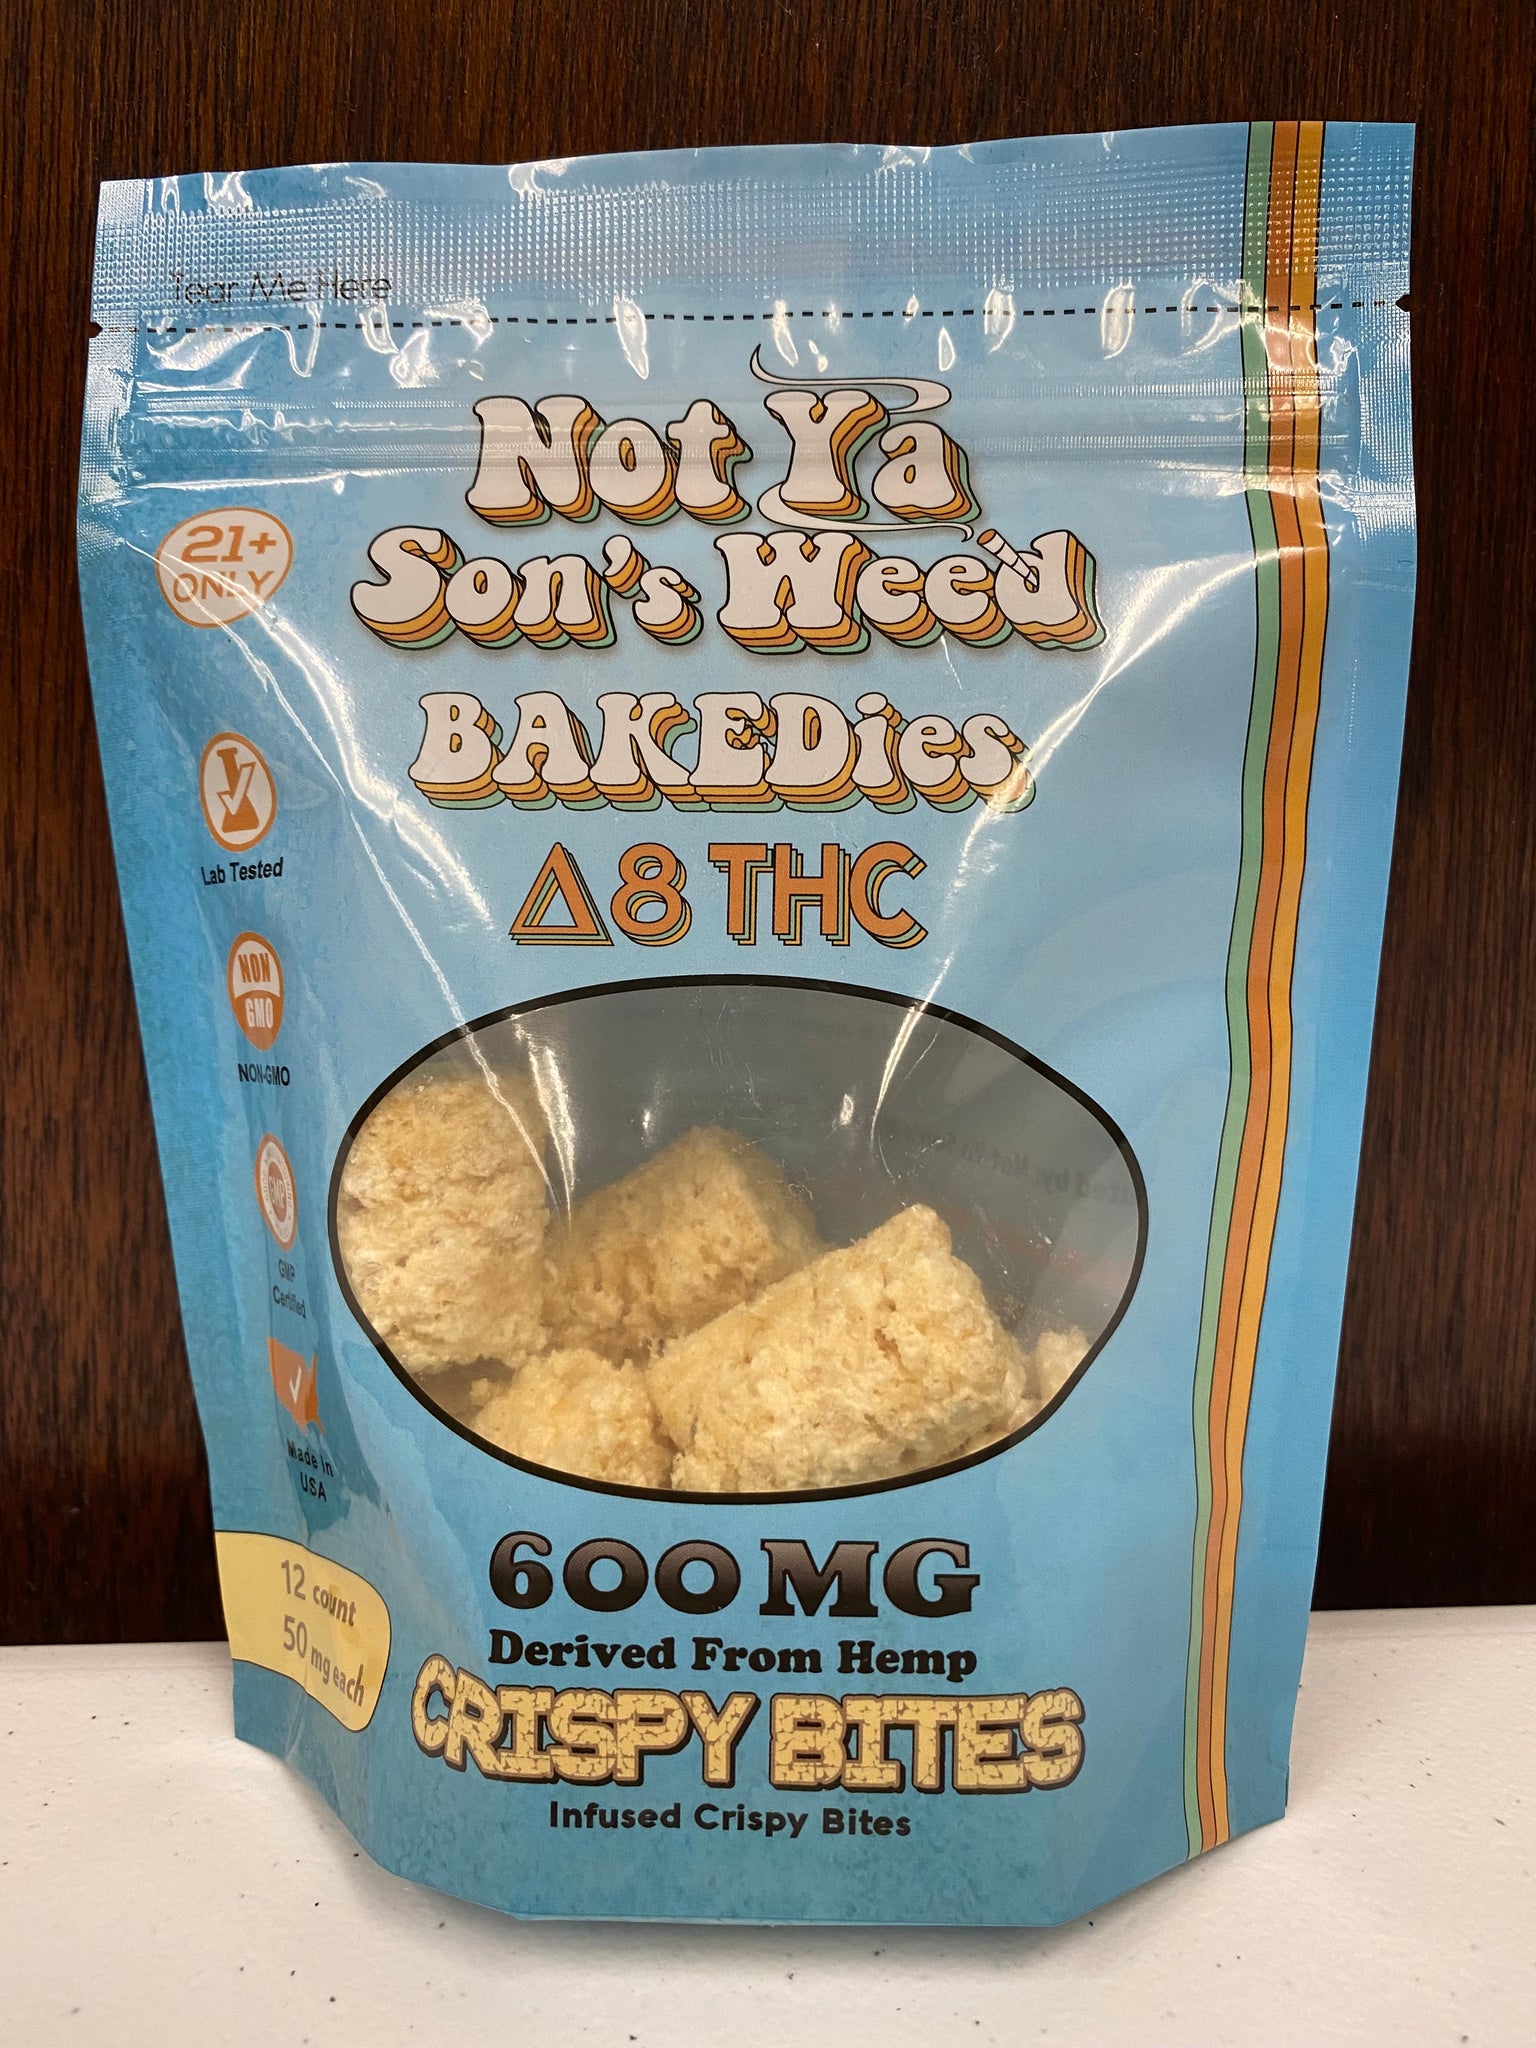 Not Ya Son's Weed Delta 8 Edibles